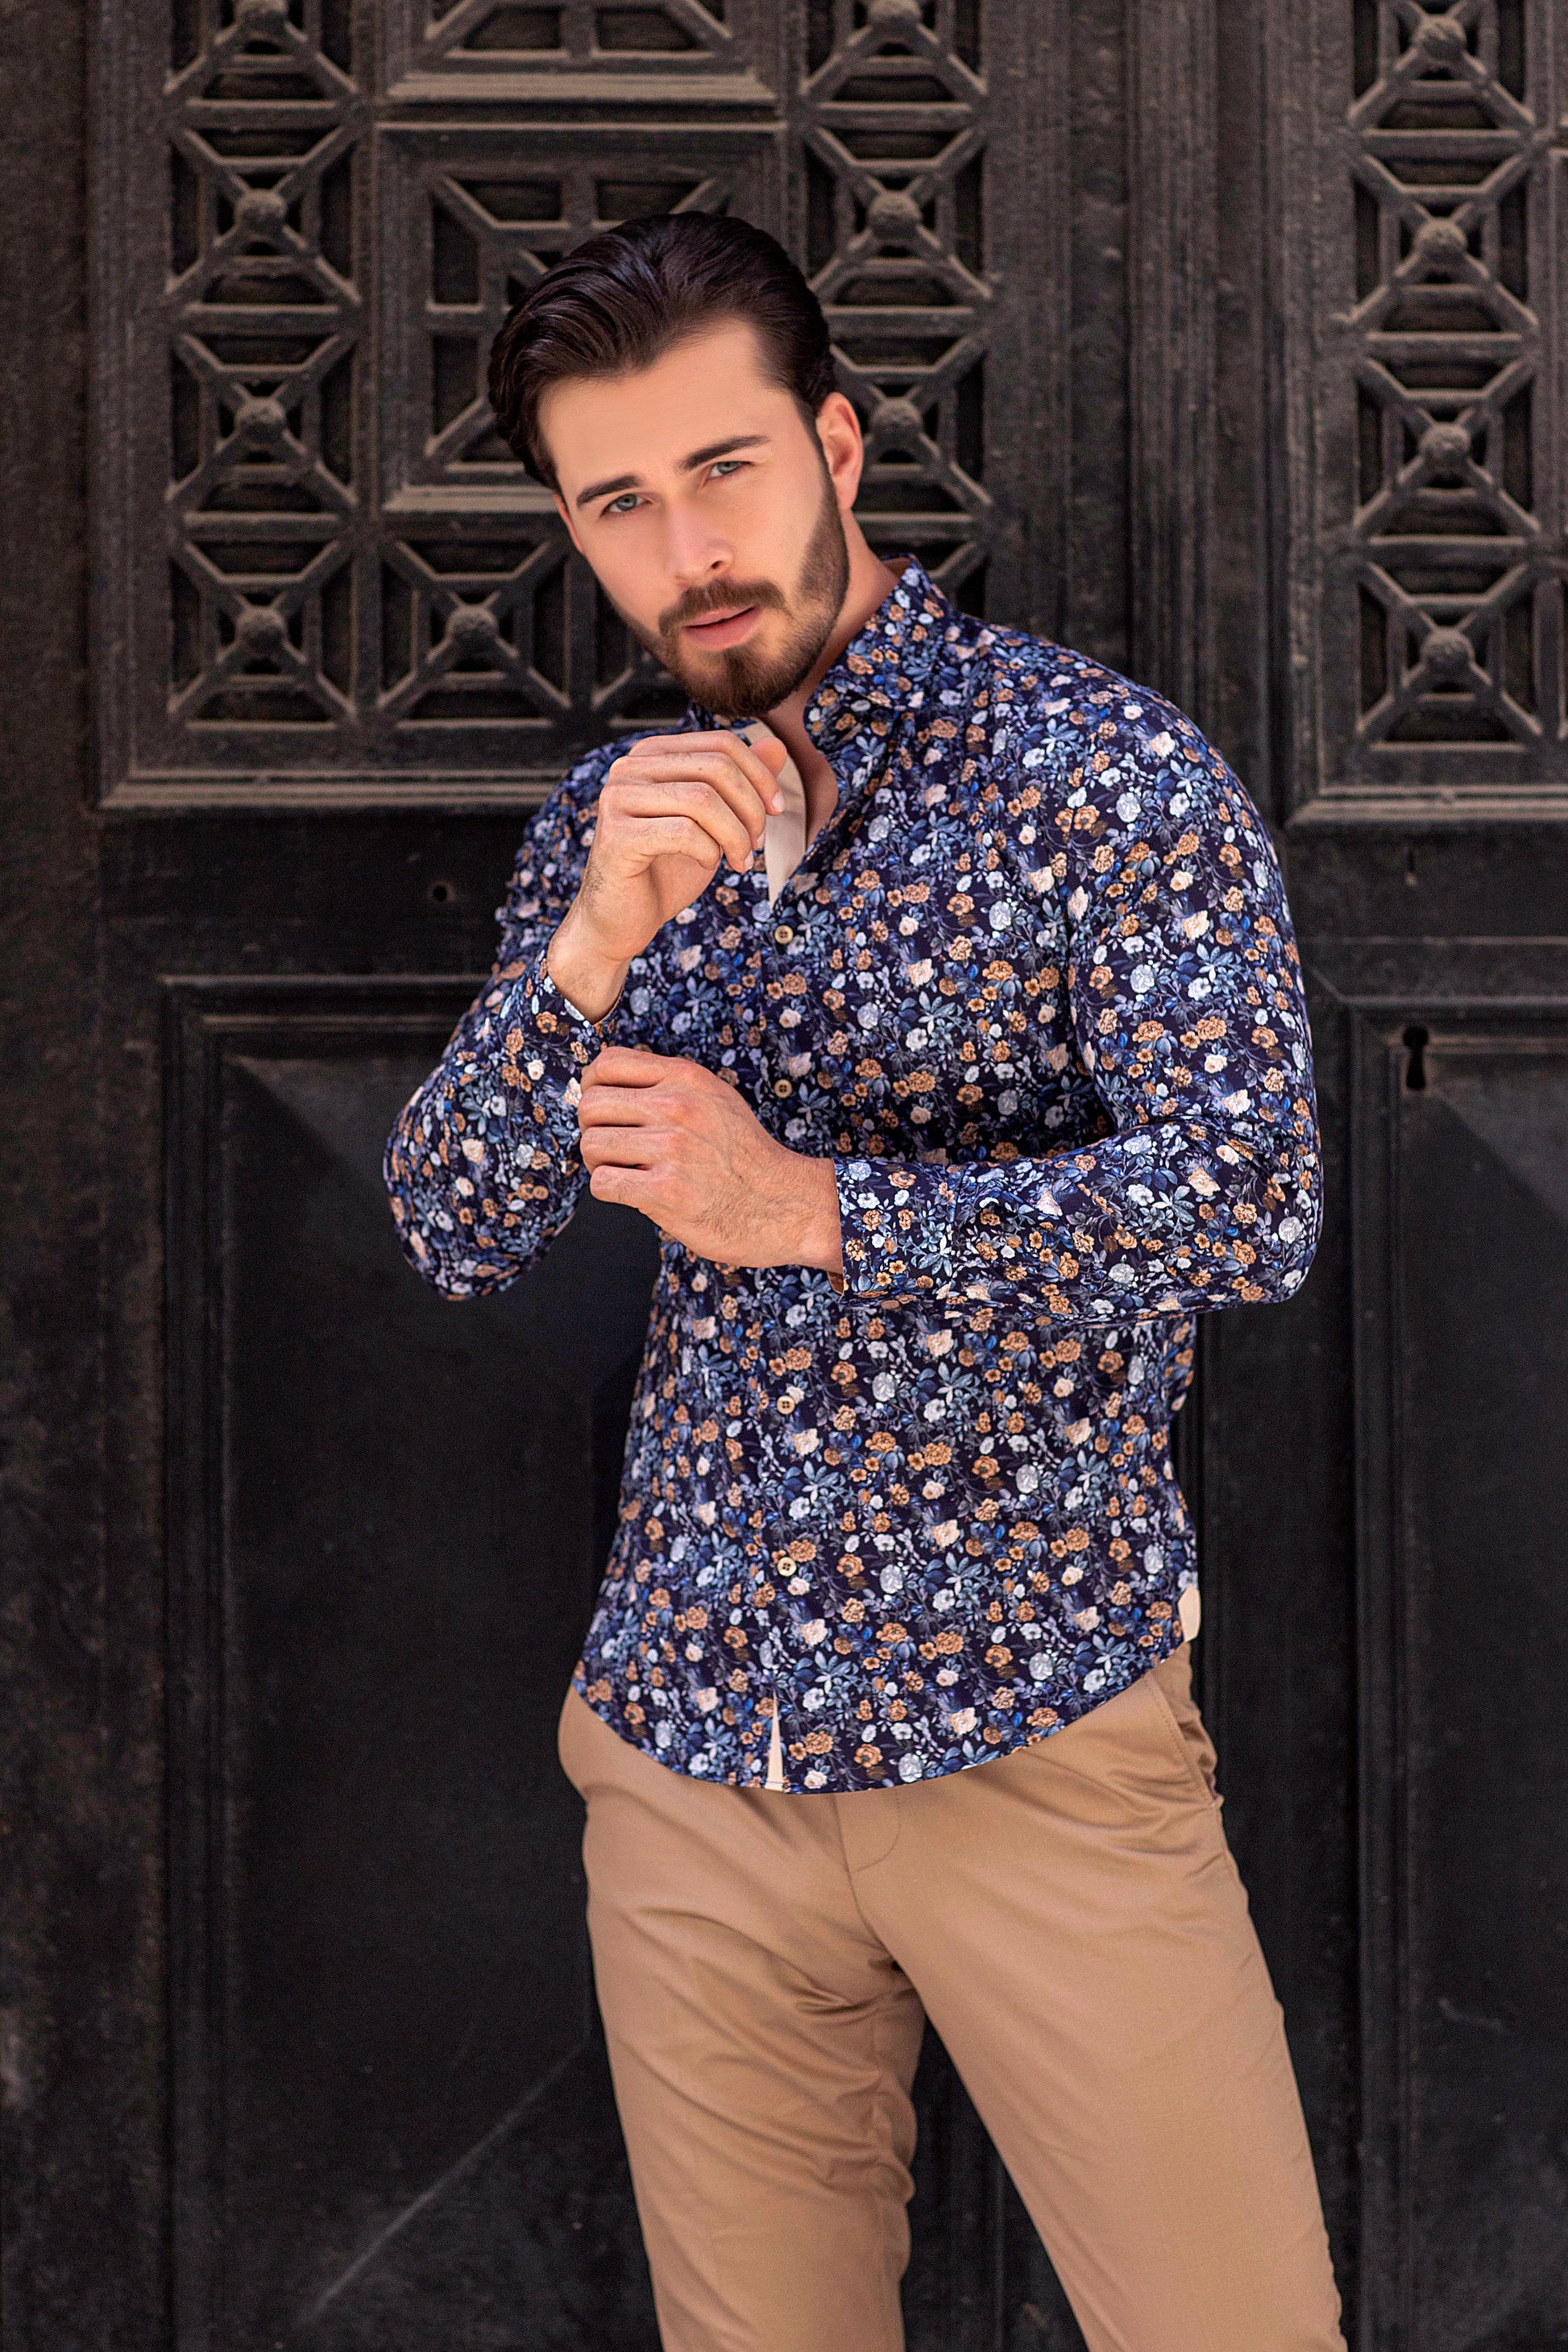 Slim, Flower-Paterned Dress Shirt Made With Mixture of Blues, Whites and Tan Colors. Tan lining. 100%  Cotton.